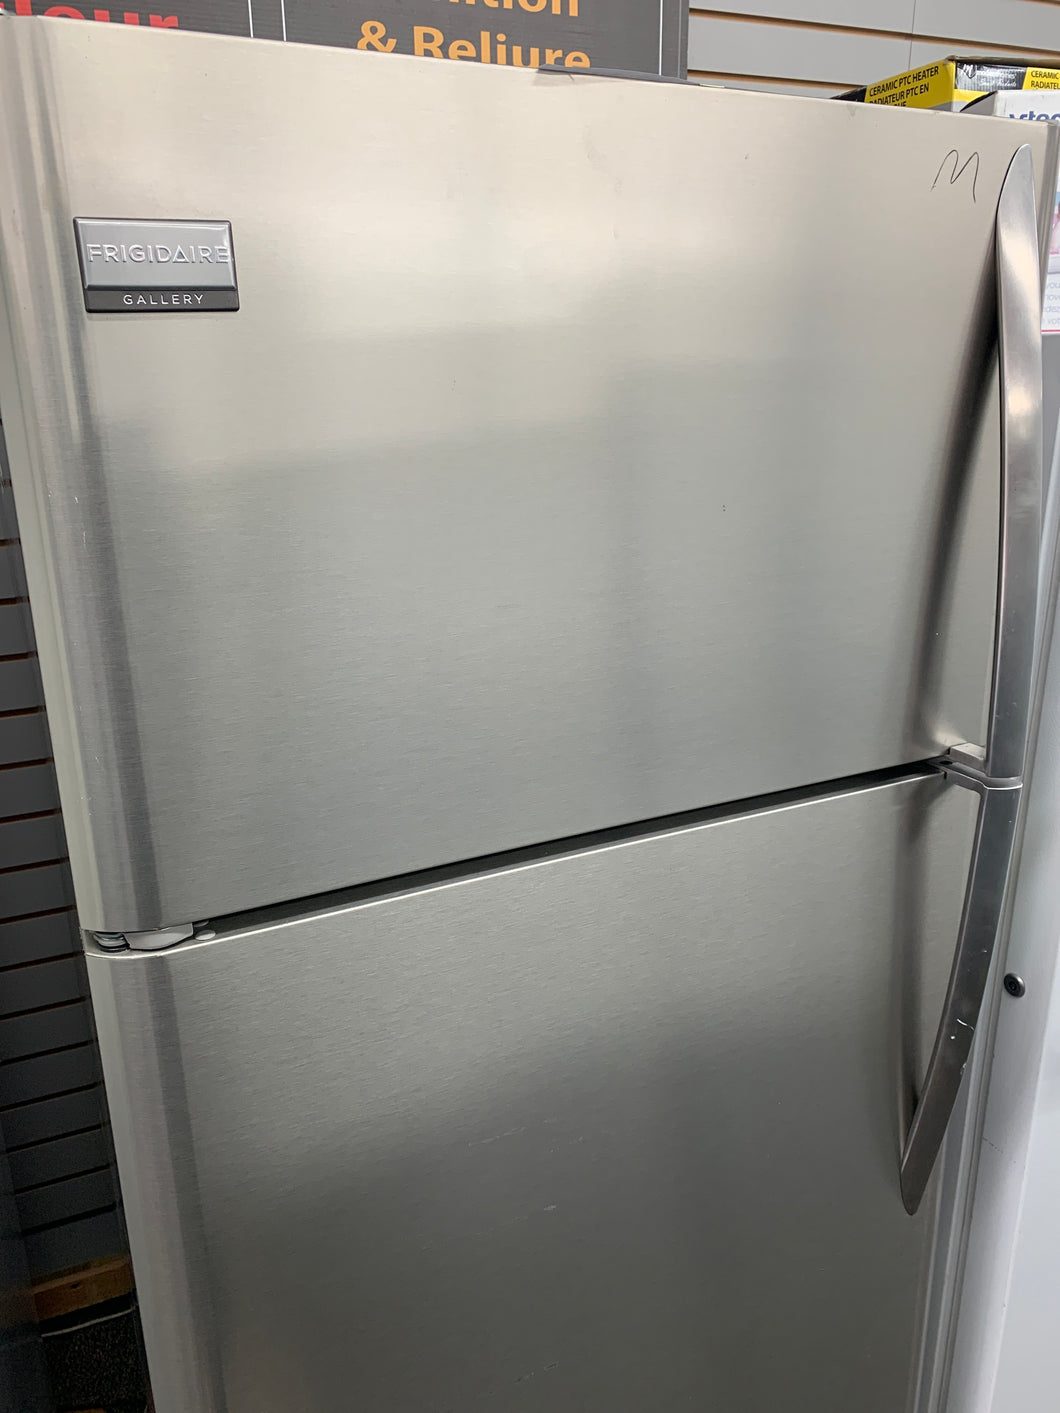 Frigidaire Galerry stainless